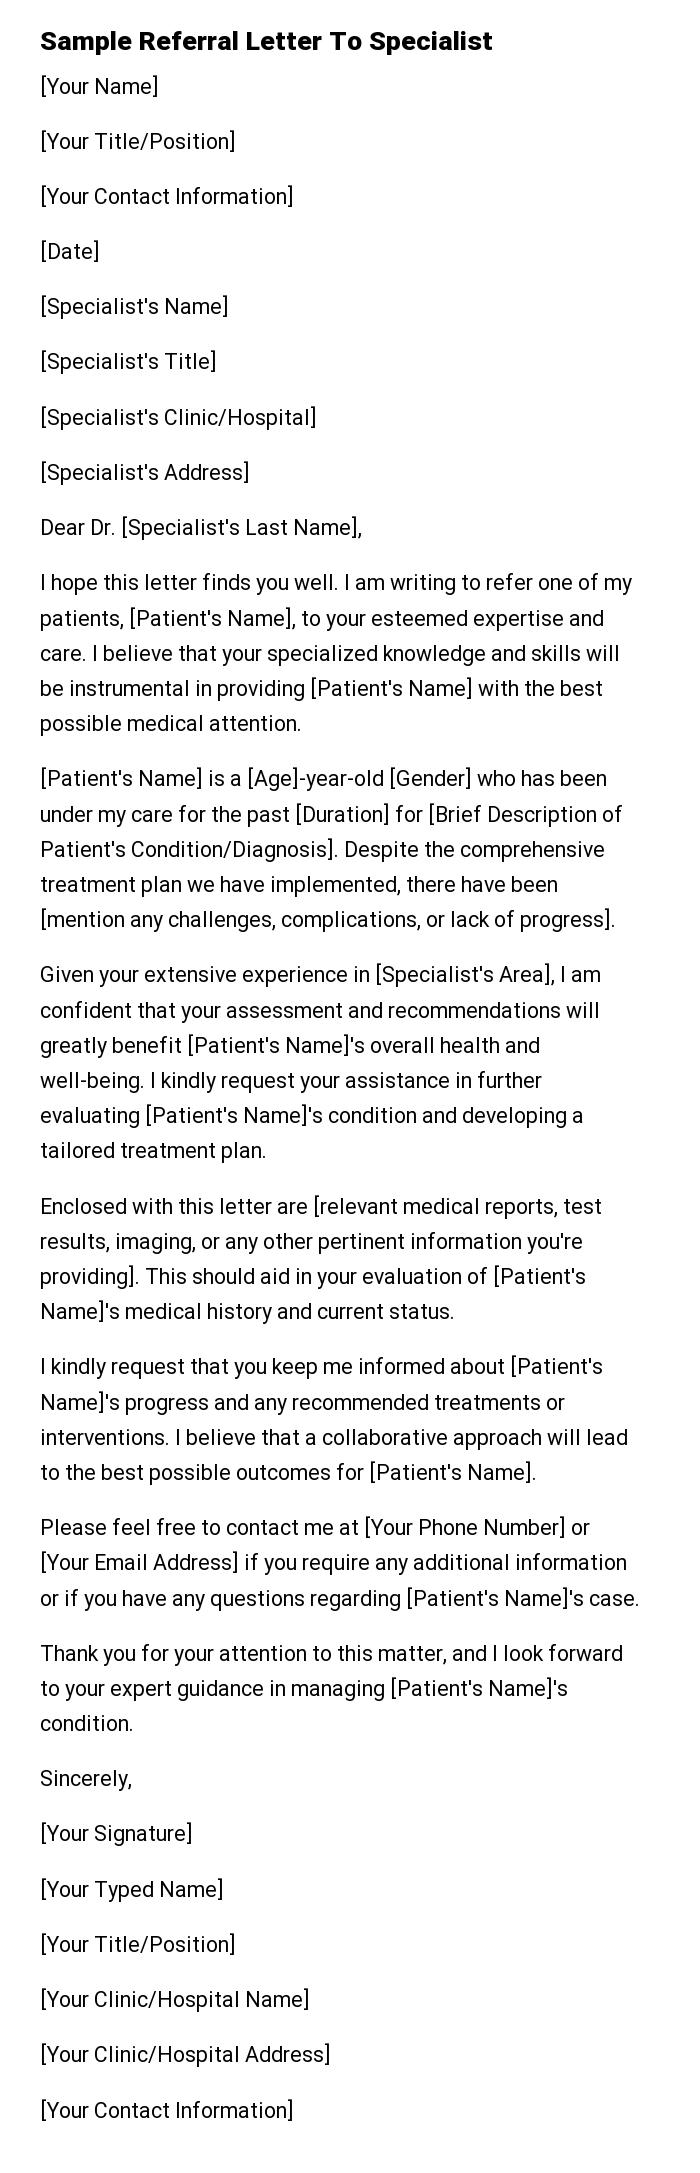 Sample Referral Letter To Specialist